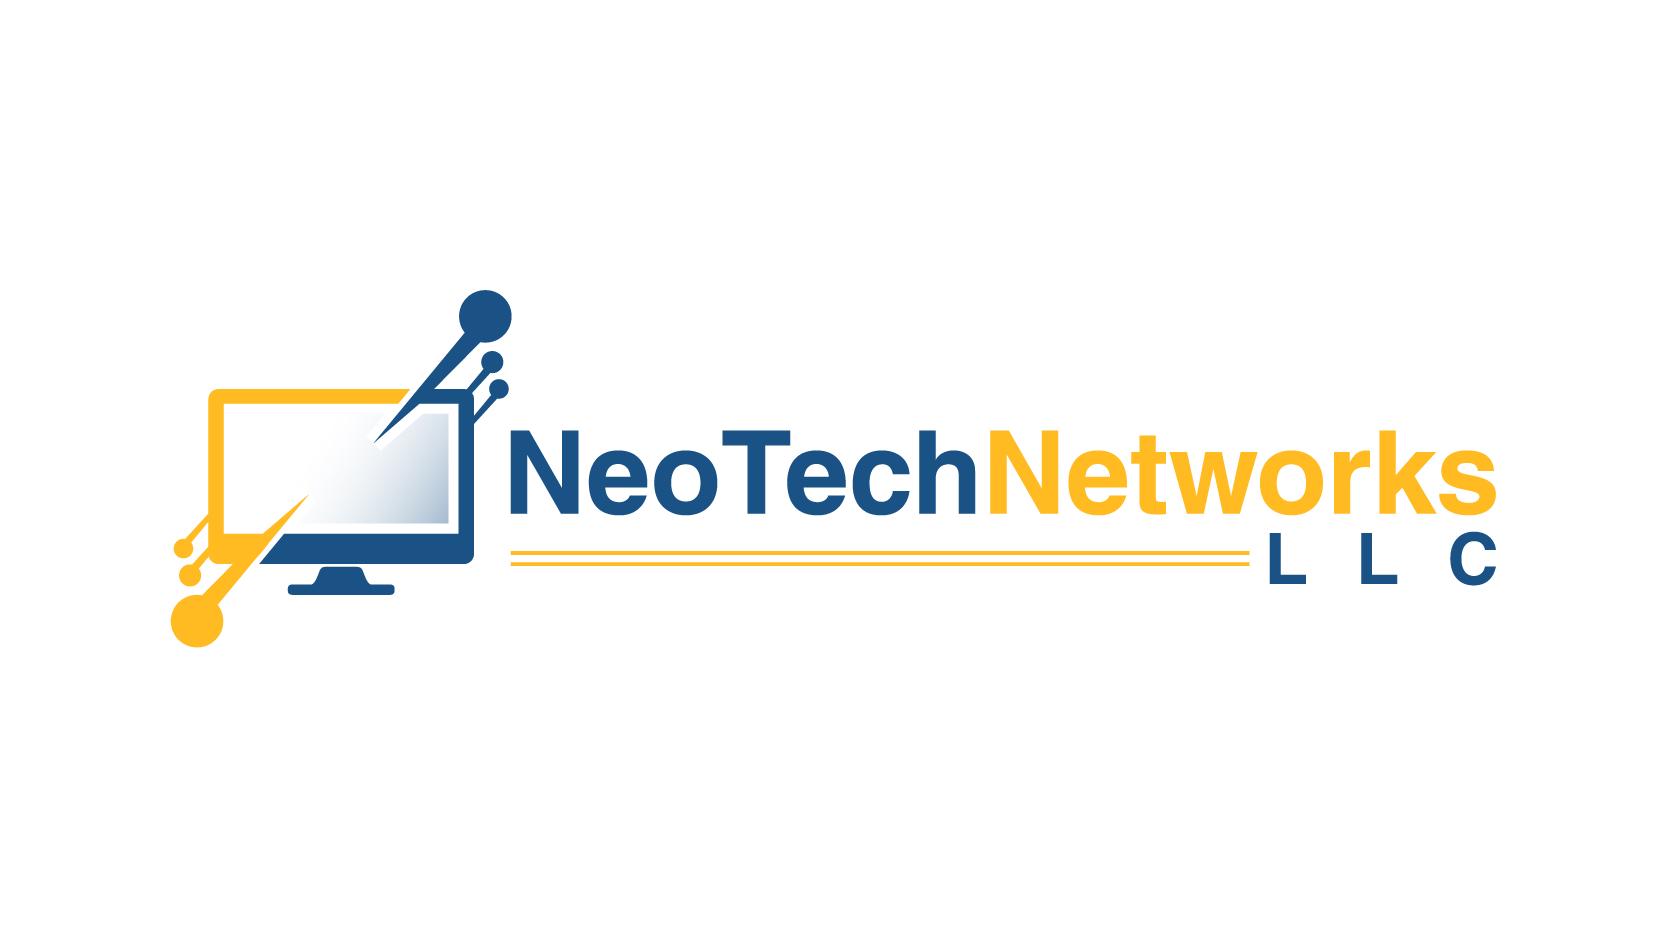 NeoTech Networks LLC profile on Qualified.One